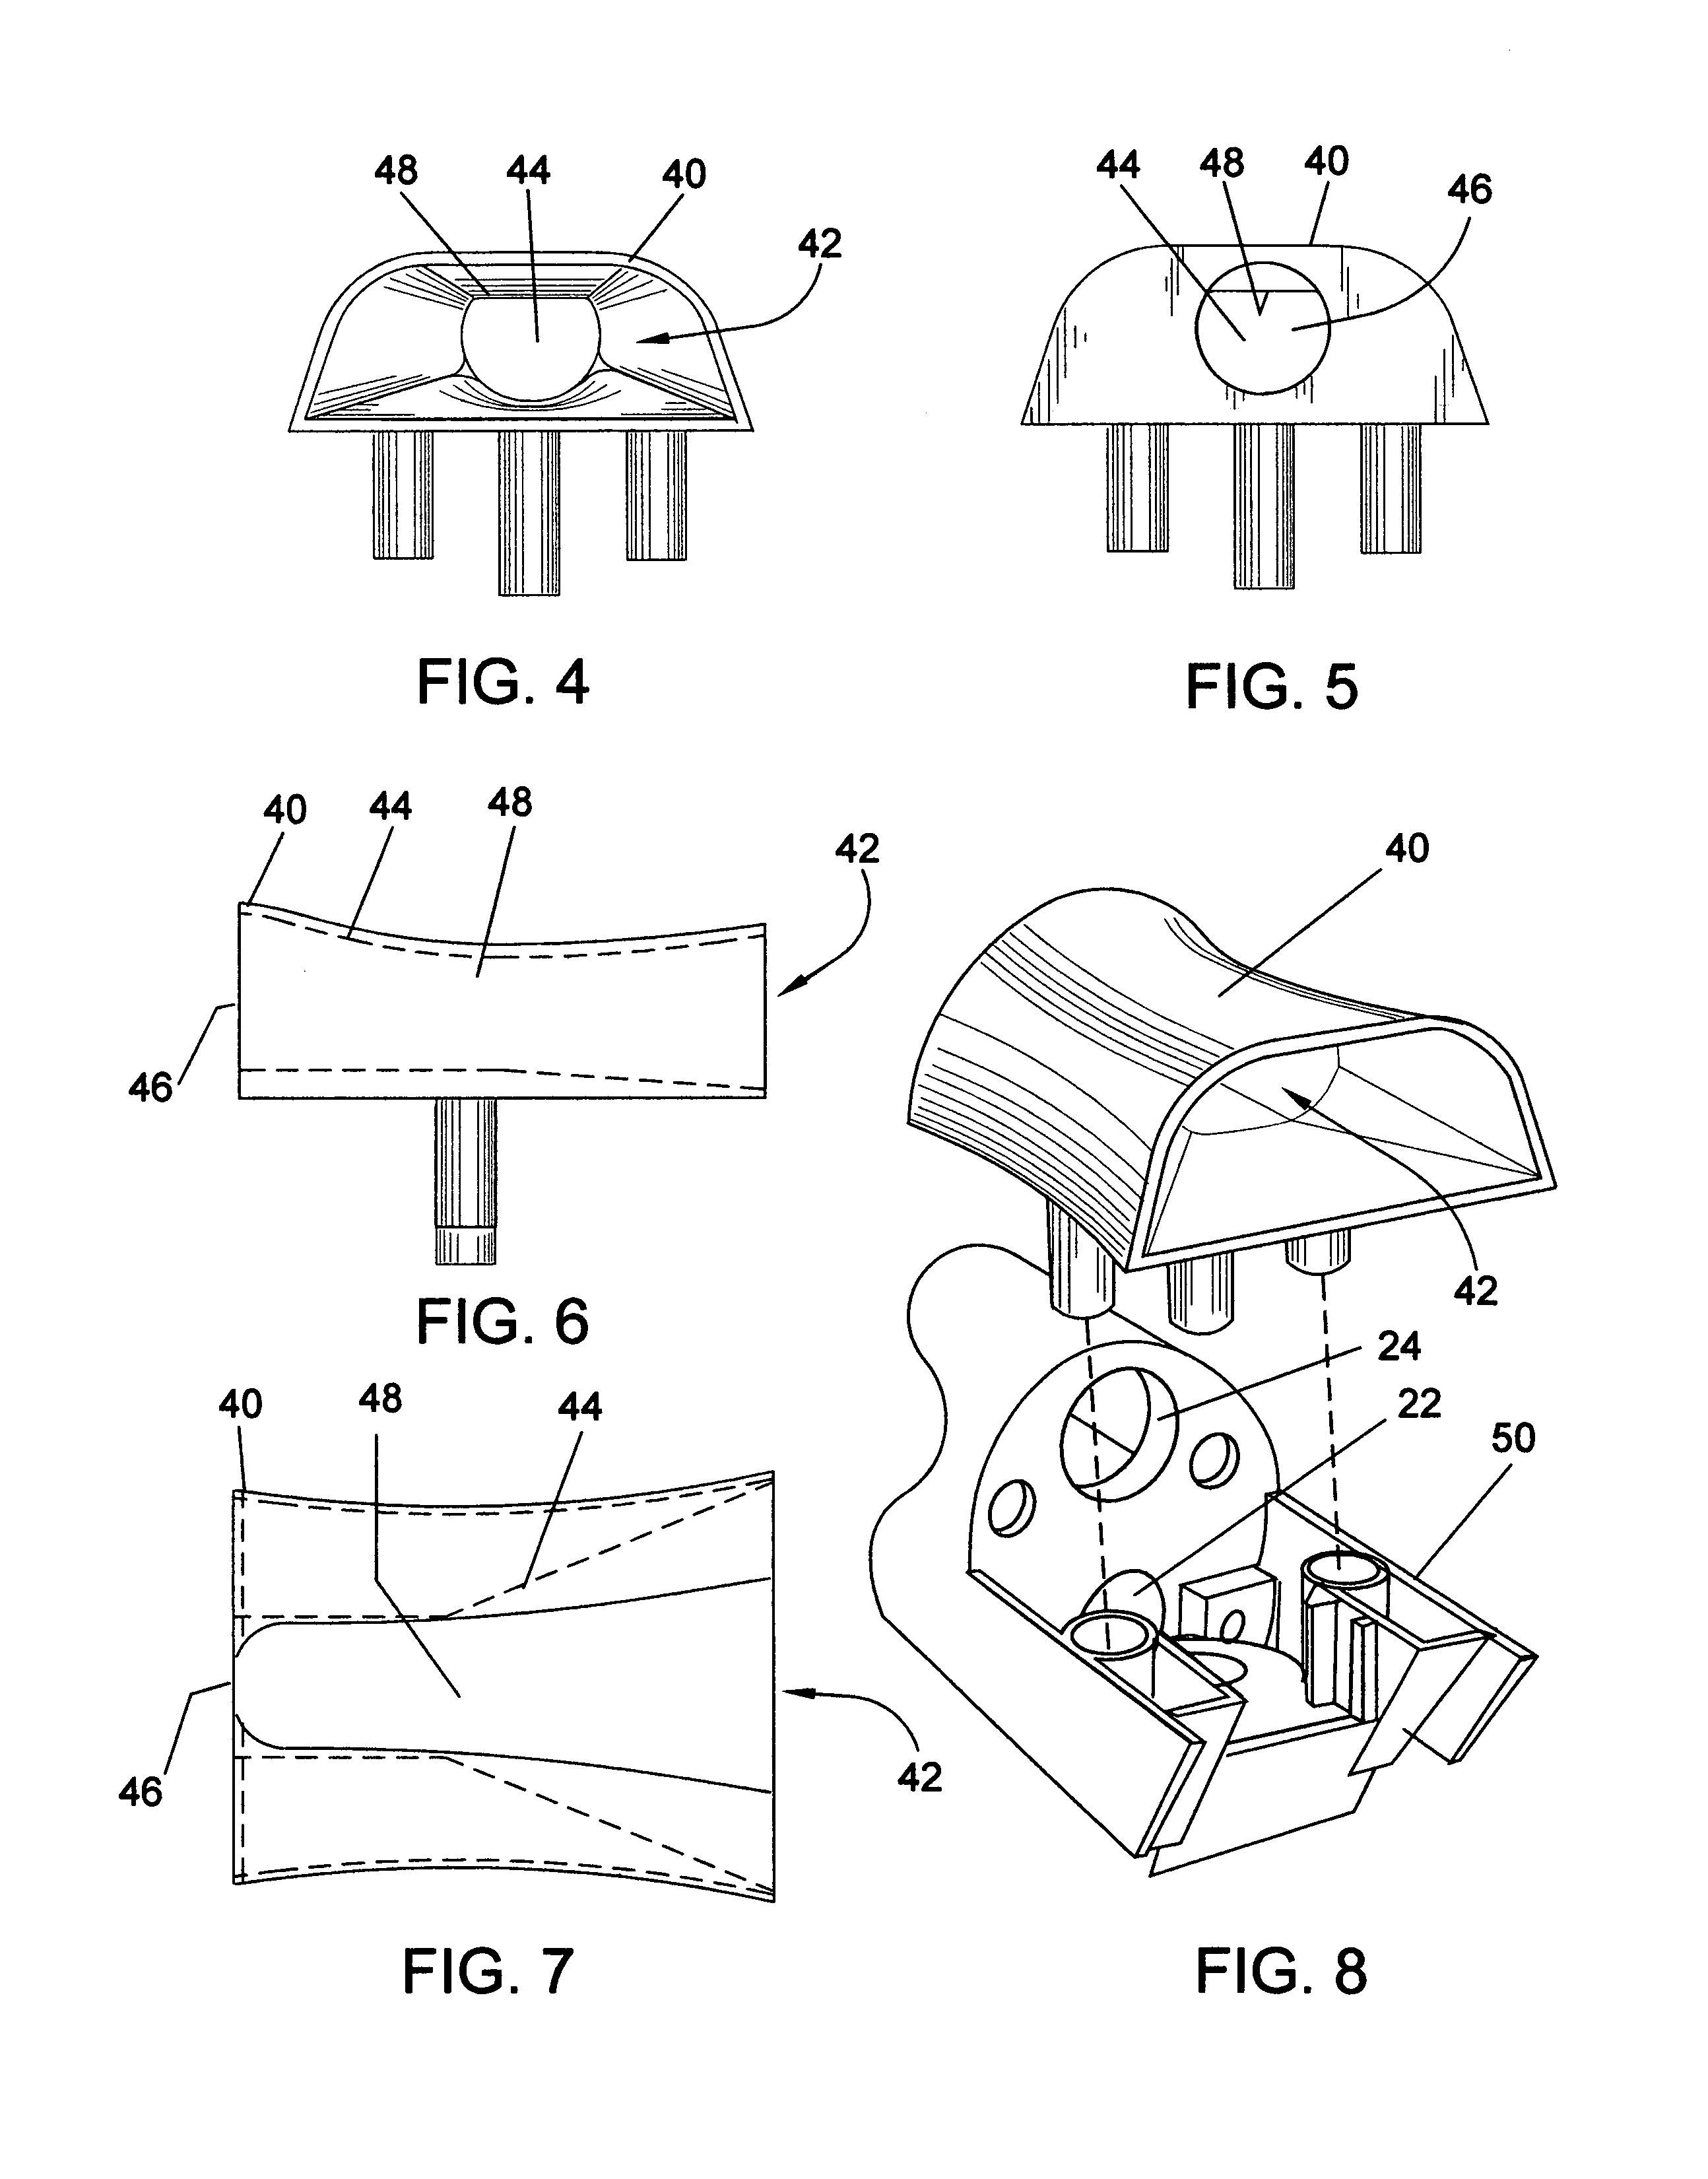 Hair cutting device with vacuum hair collection system